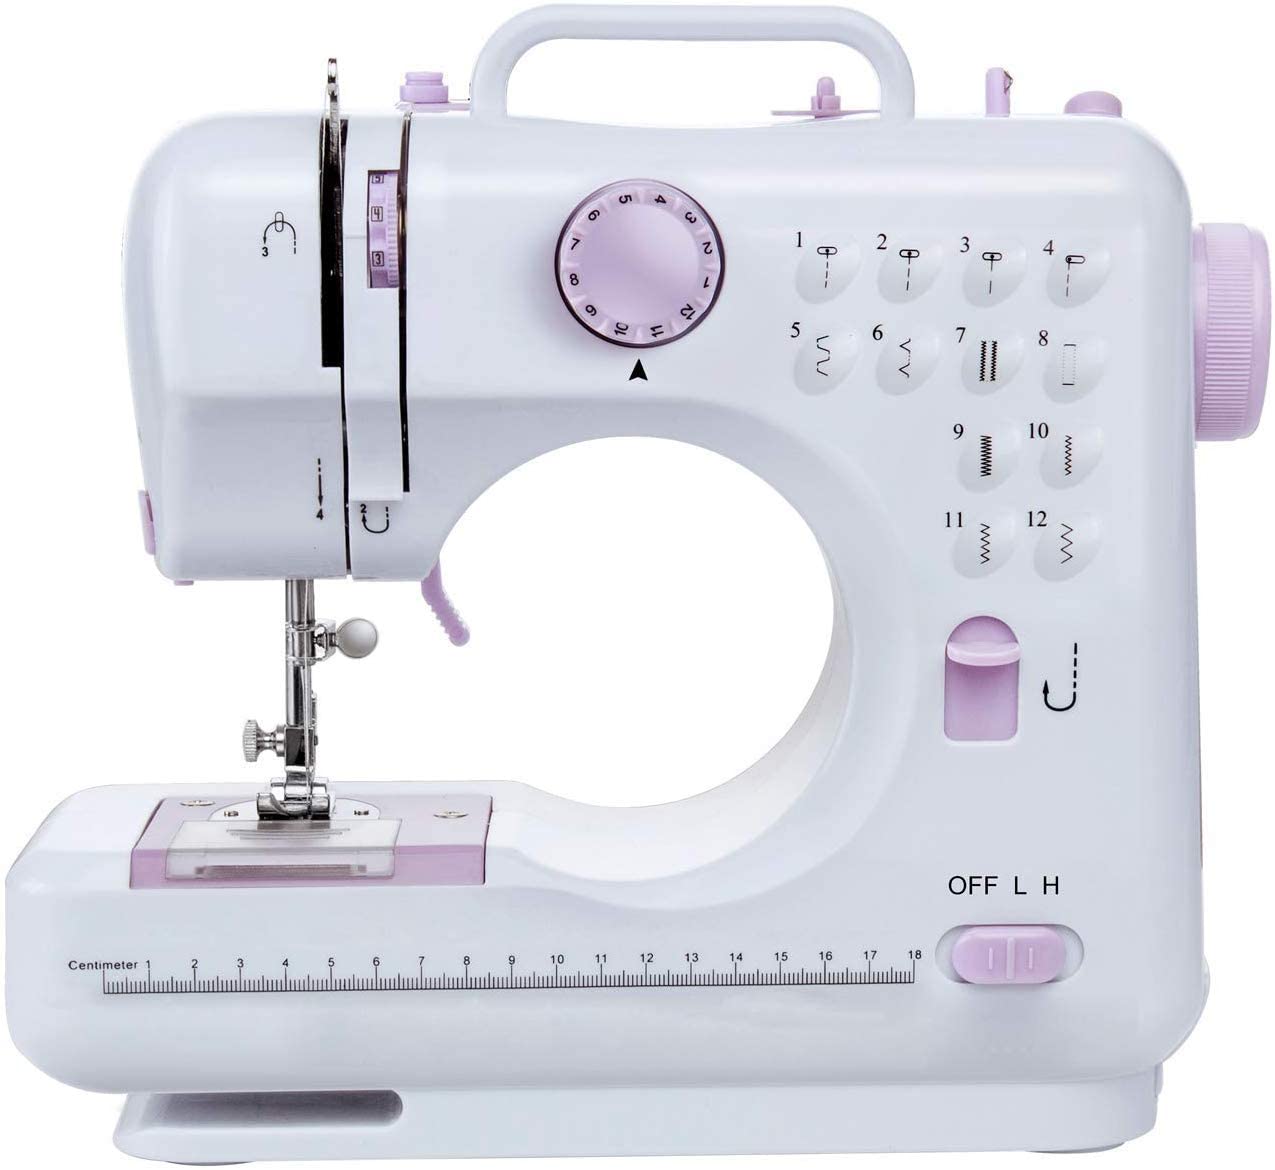 Sewing machine-12 Stitch Patterns Foot Pedal Double Speed Control Sewing Machine with Replaceable Presser ，Electric Overlock Sewing Machine Small Household Sewing Tool 2 Speed